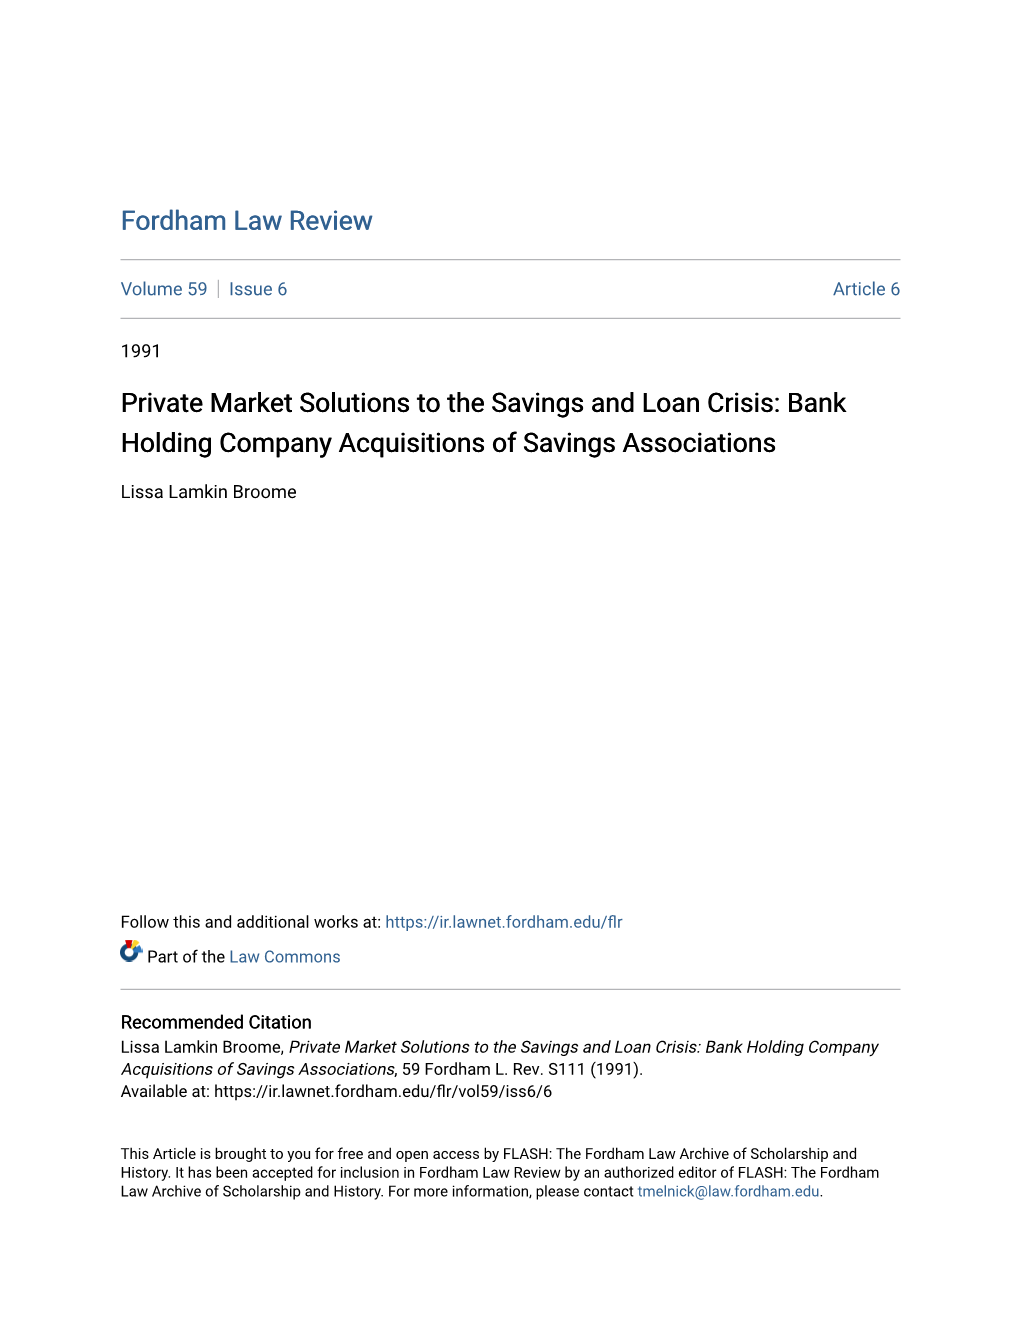 Private Market Solutions to the Savings and Loan Crisis: Bank Holding Company Acquisitions of Savings Associations